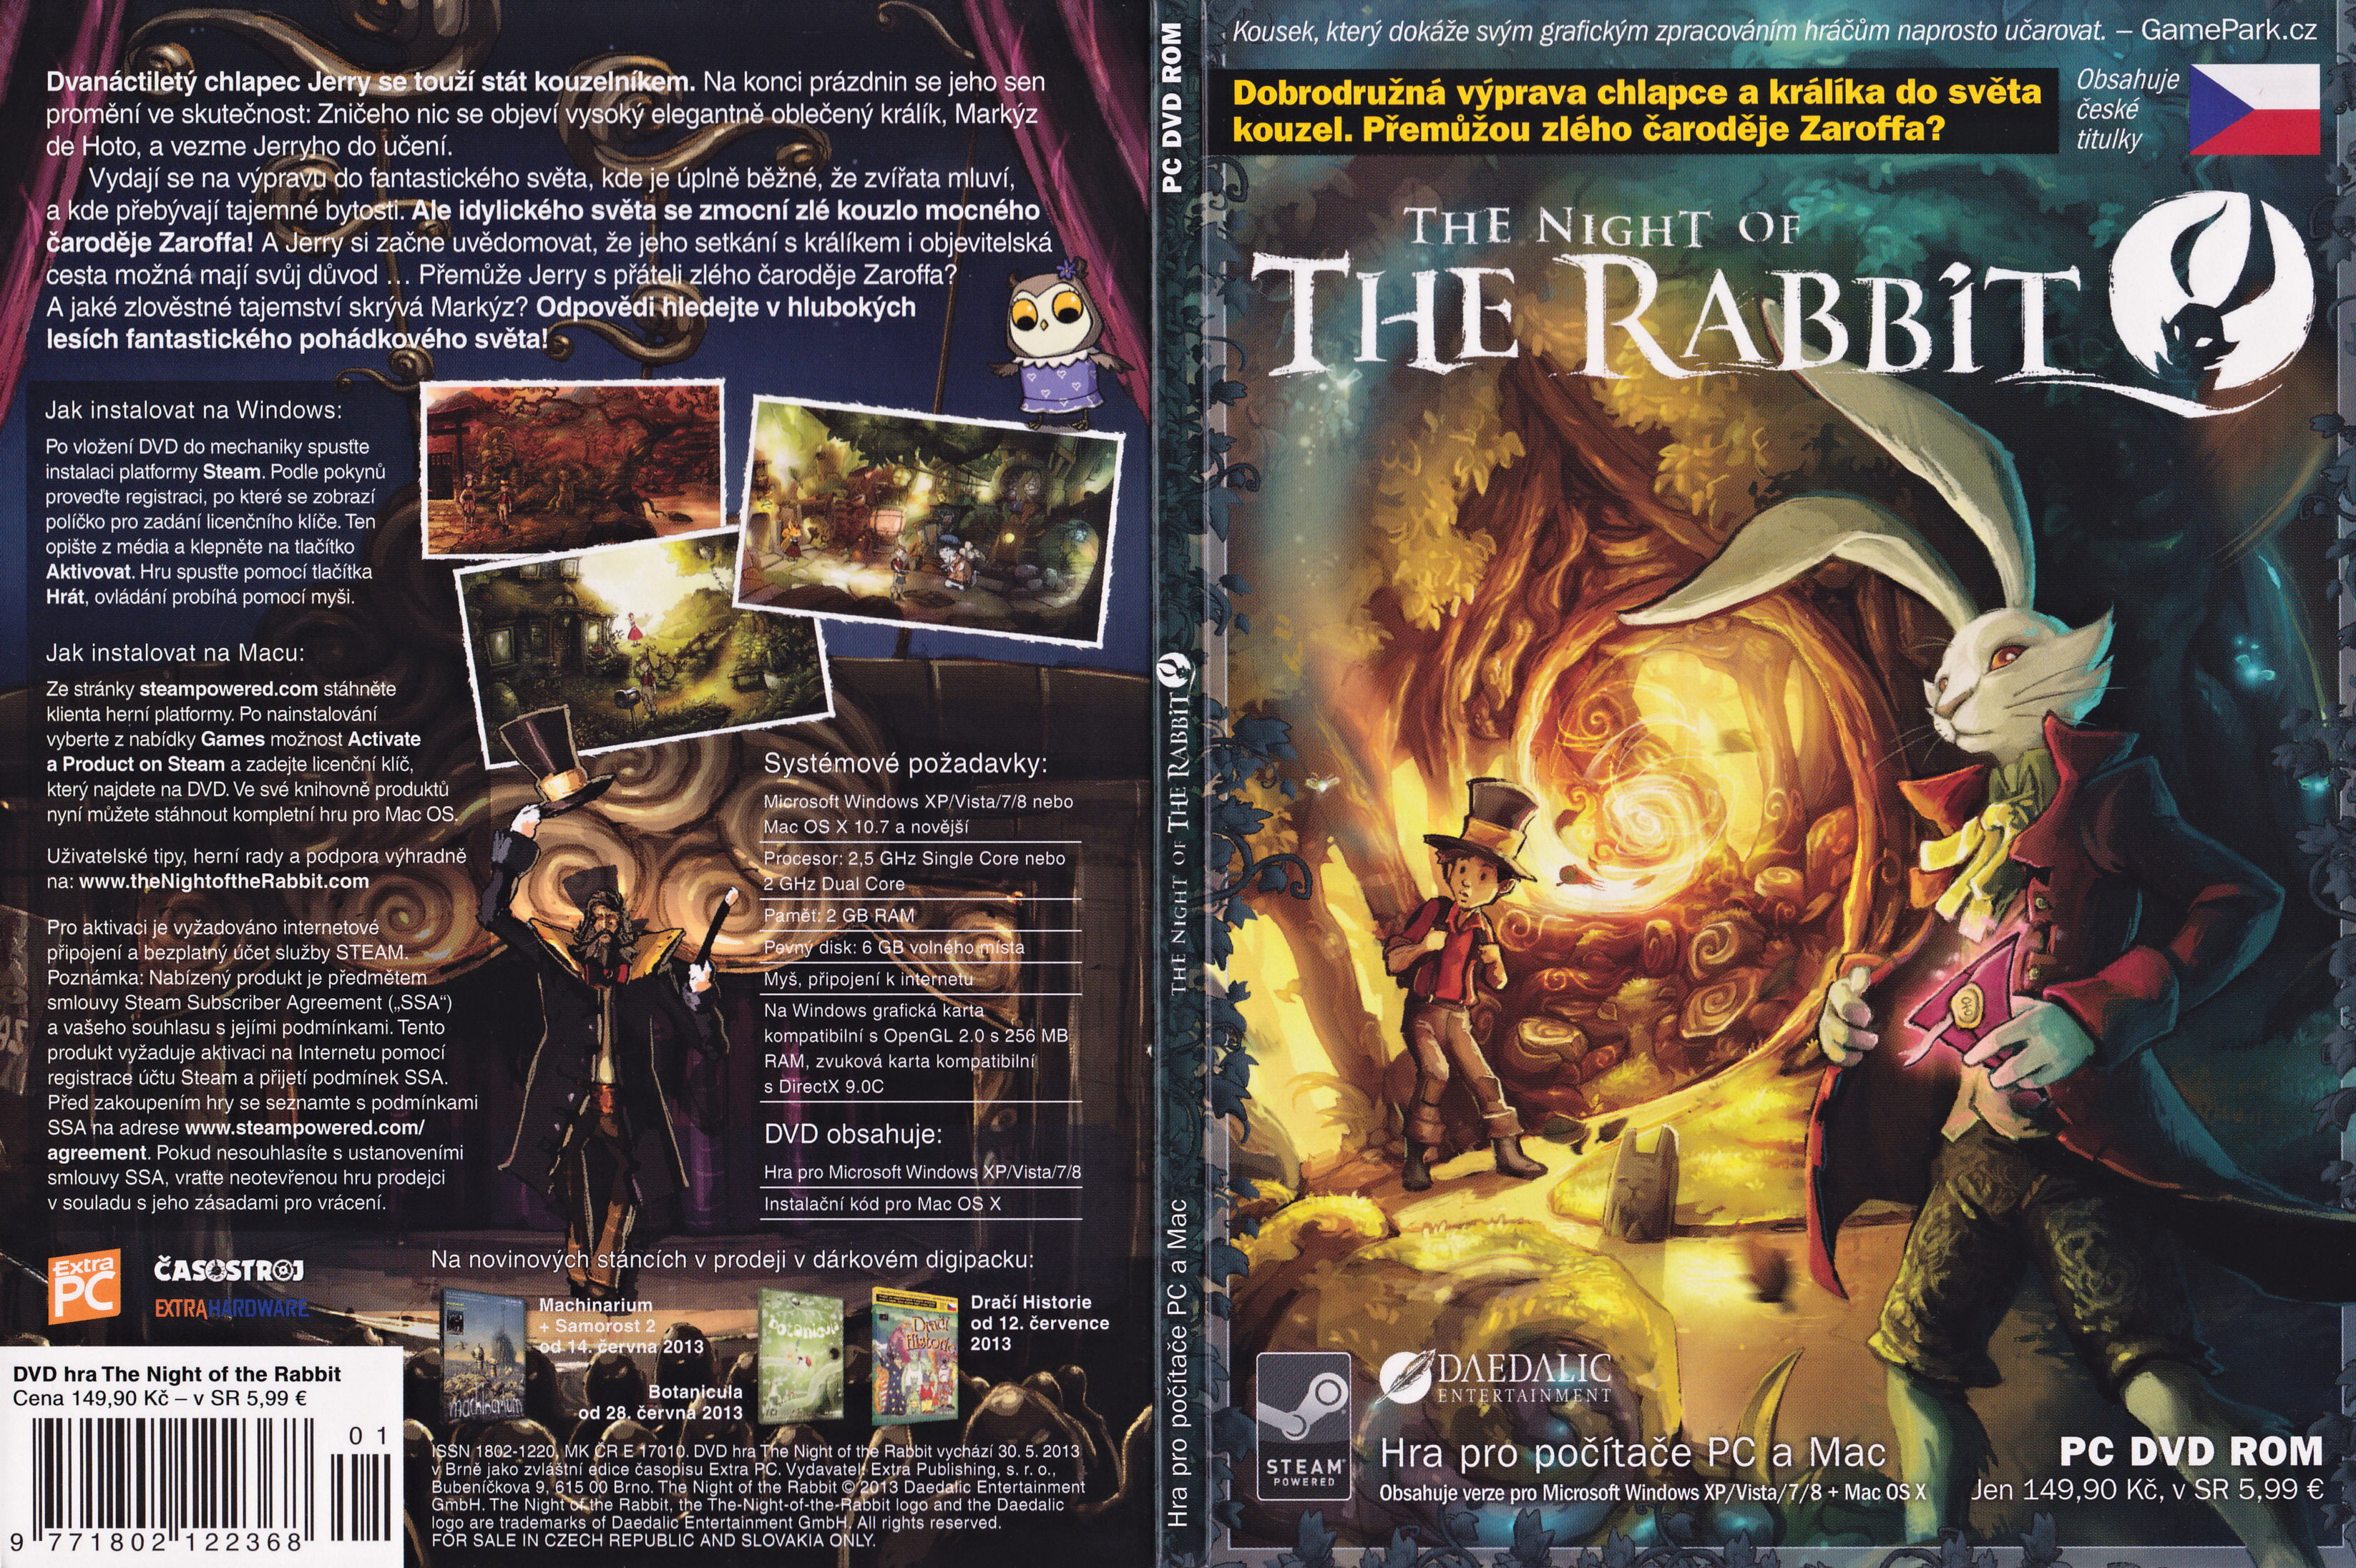 The Night of the Rabbit - DVD obal